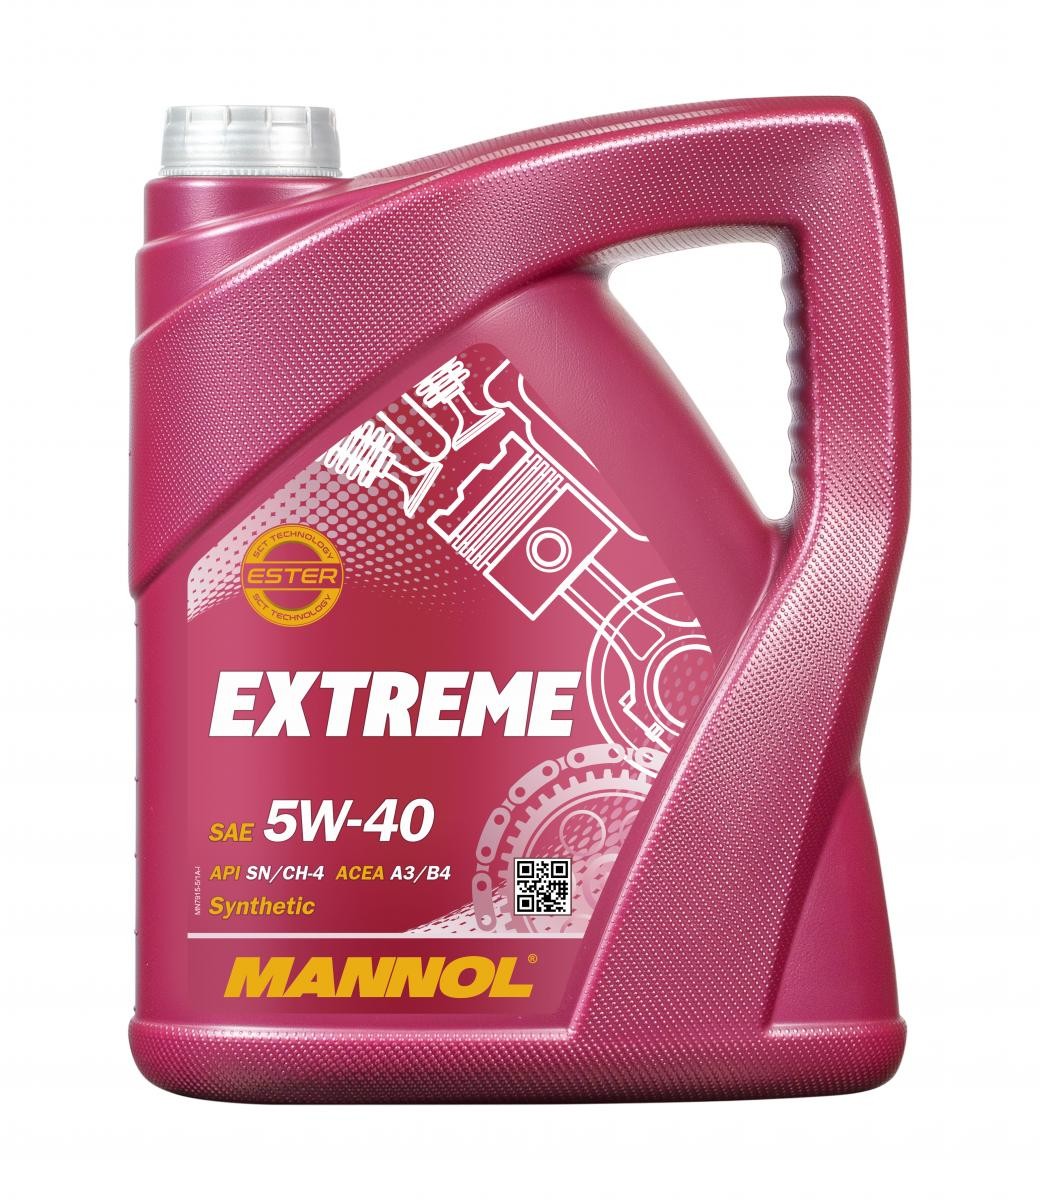 Automobile oil MB 229.5 MANNOL - MN7915-5 EXTREME